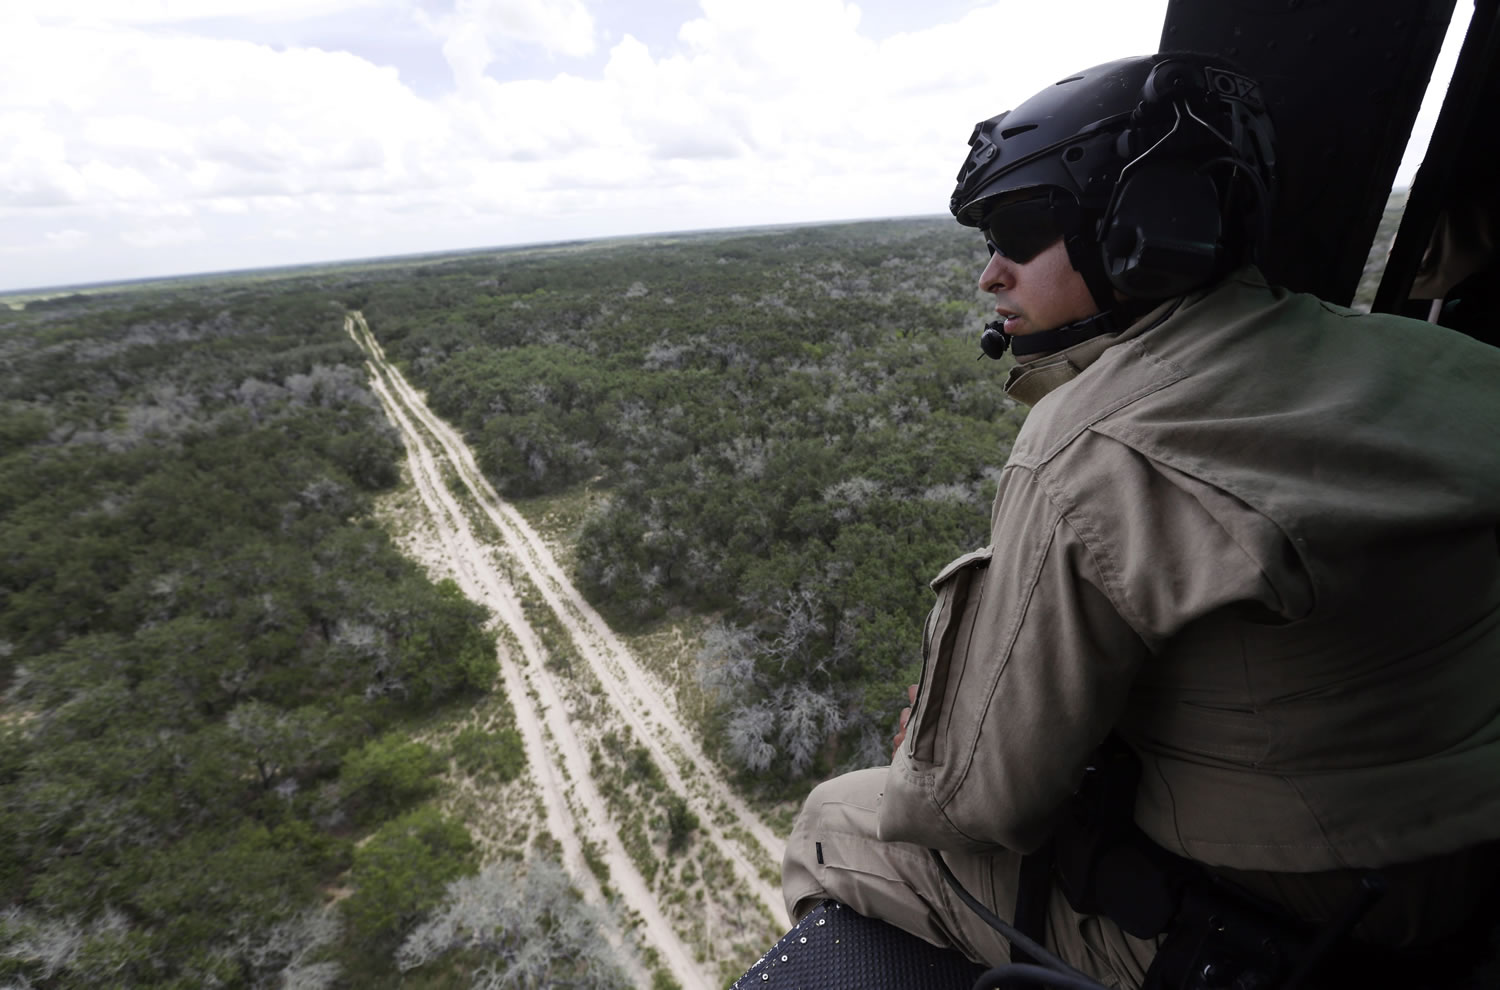 Eric Gay/Associated Press
A U.S. Customs and Border Protection Air and Marine agent peers out of a helicopter during a patrol flight near the Texas-Mexico border near McAllen, Texas. The Border Patrol has been joined by many official and unofficial guards.  Since illegal immigration spiked in the Rio Grande Valley this summer, the Border Patrol has dispatched more agents, the Texas Department of Public Safety has sent more troopers and Texas Gov. Rick Perry deployed as many as 1,000 guardsmen to the area.